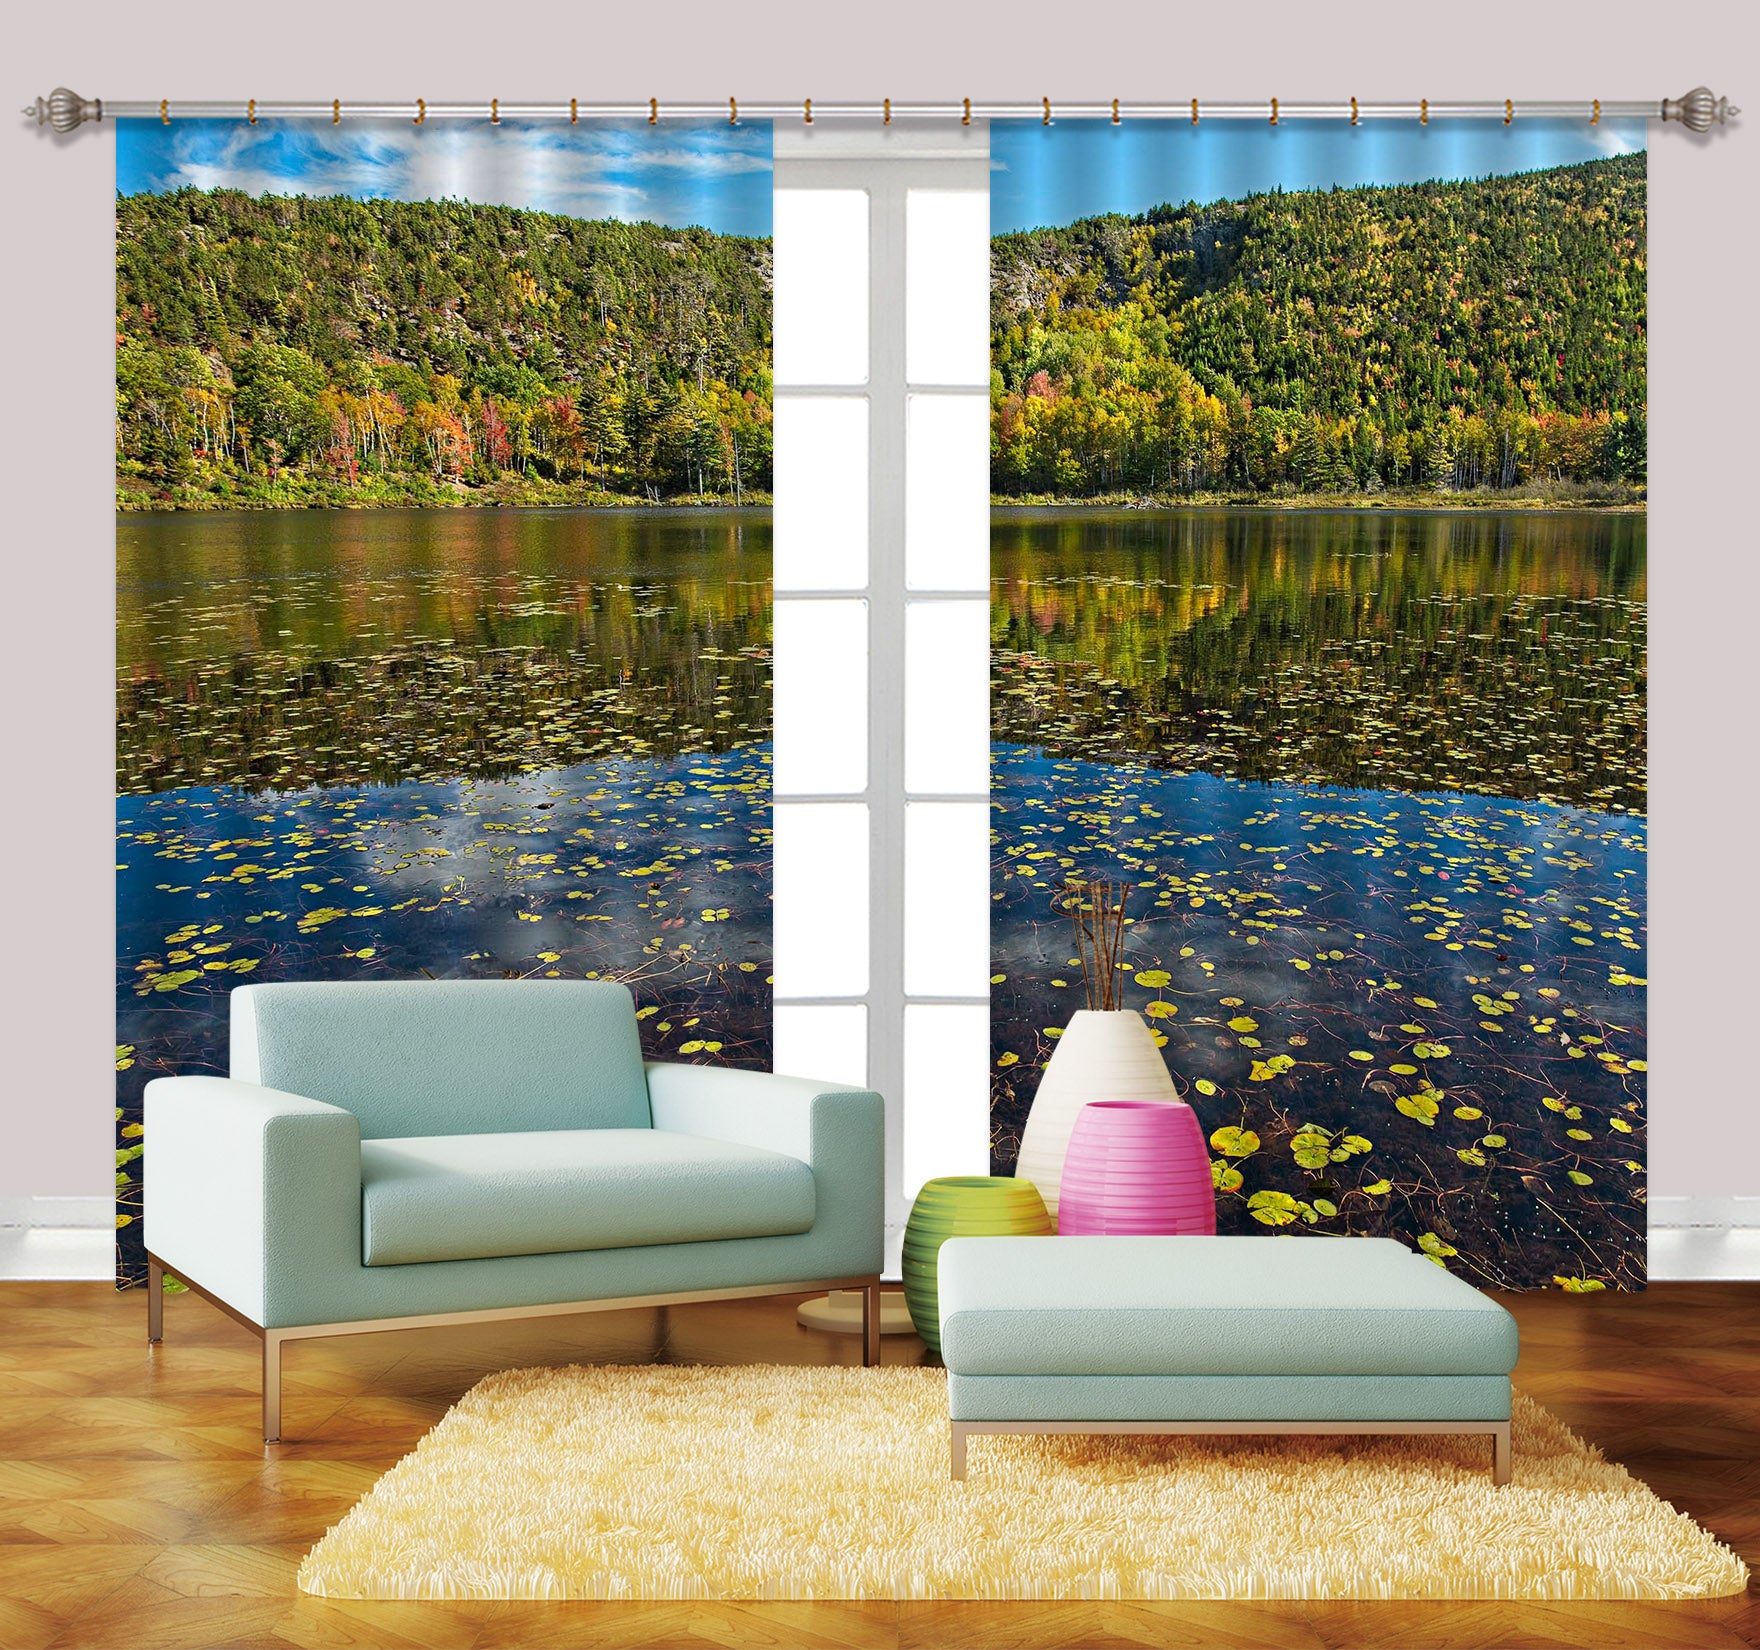 3D Lake Leaves 62155 Kathy Barefield Curtain Curtains Drapes